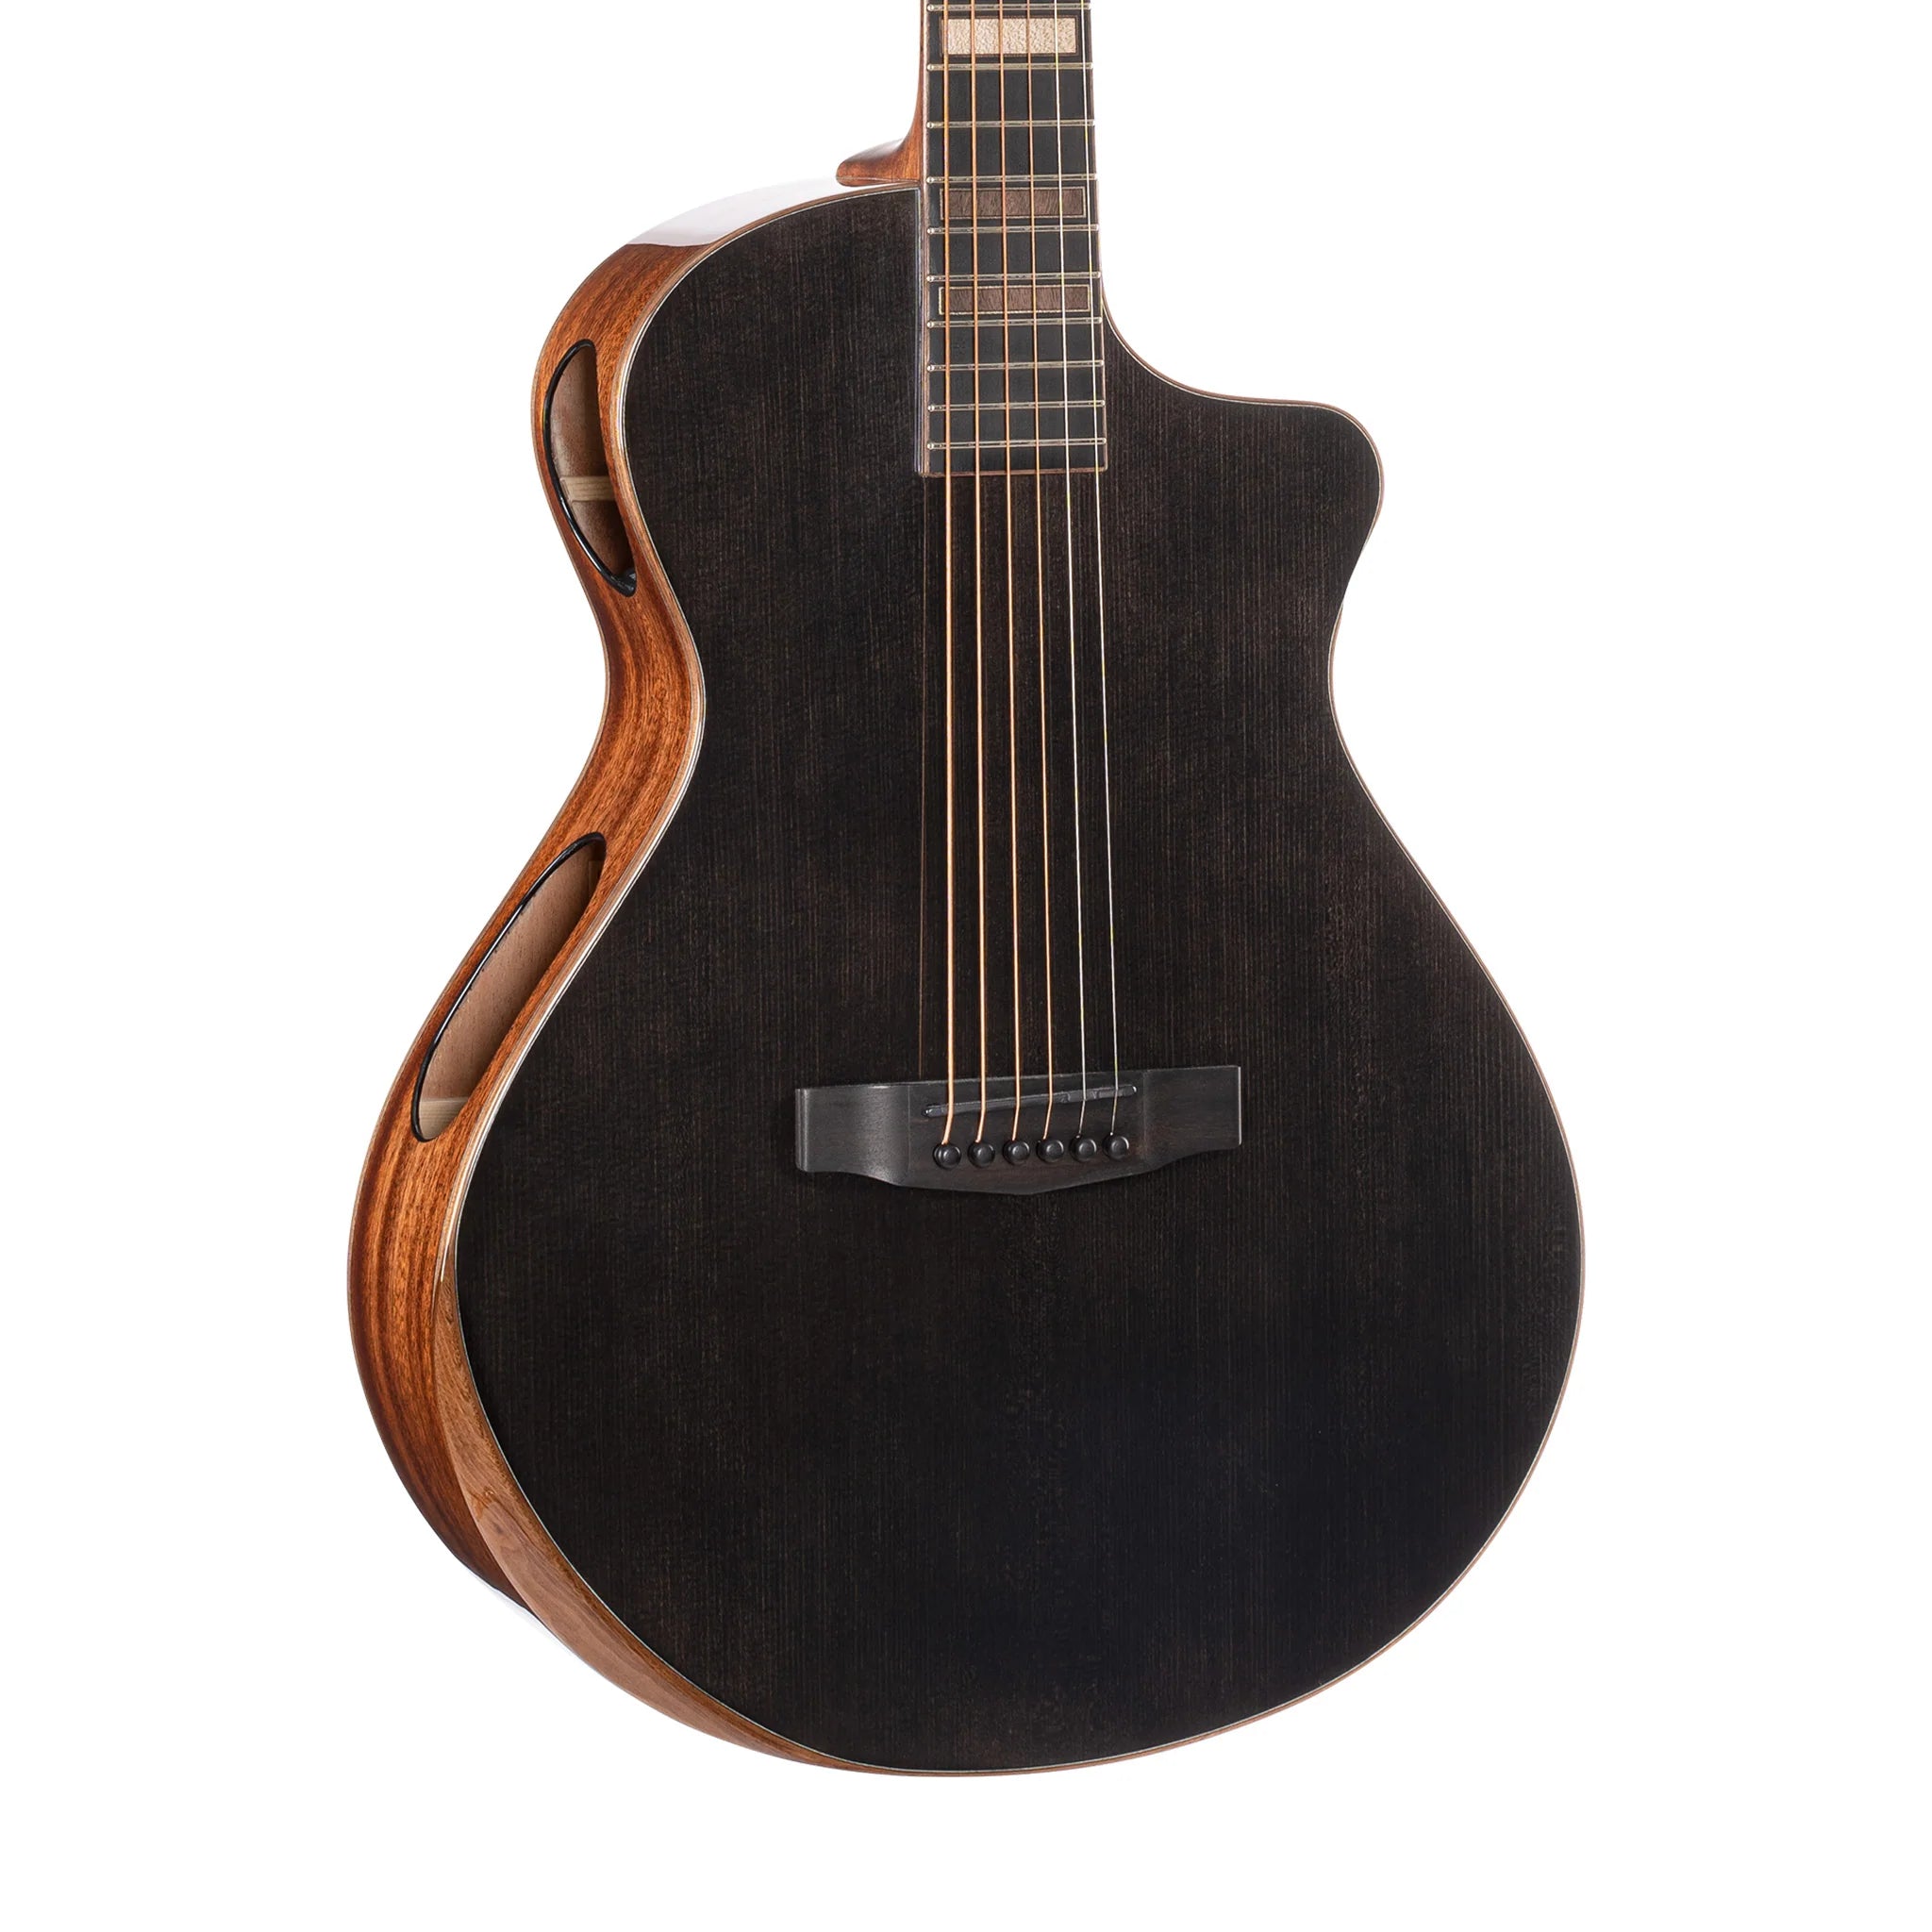 Master Grade Solid European Spruce Top with Solid Mahogany Back &amp; Sides.